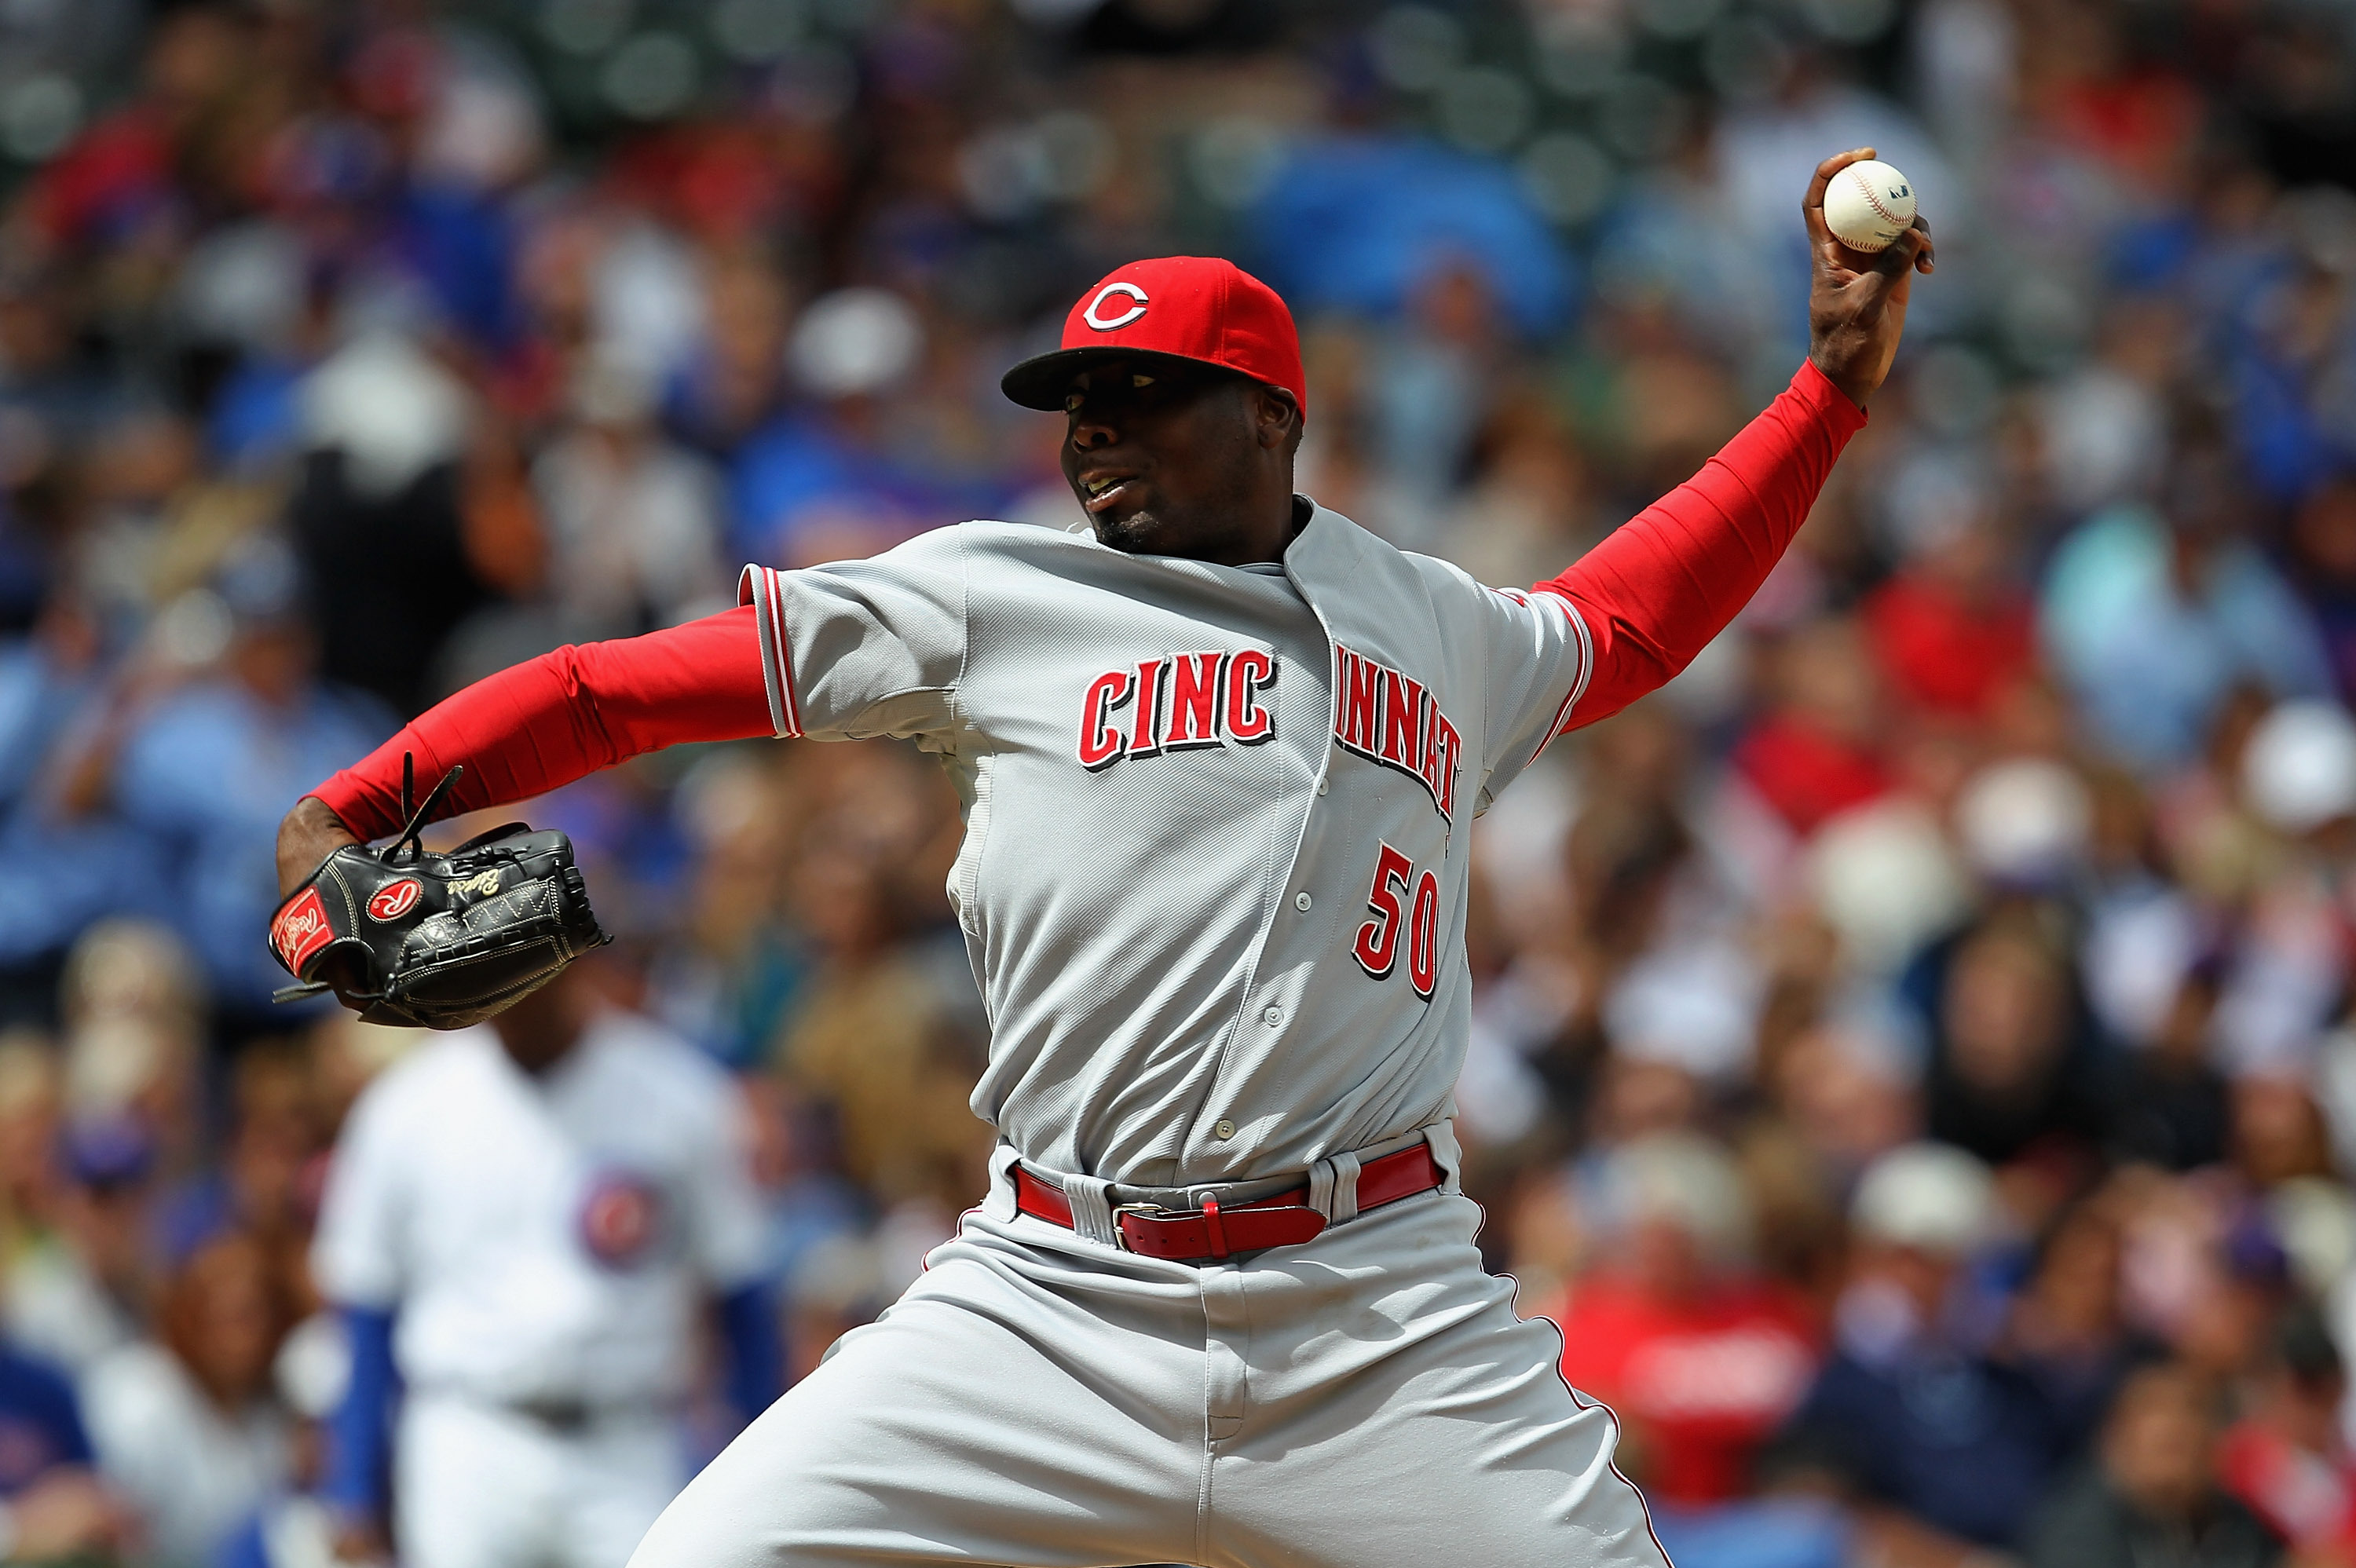 Dontrelle Willis will once again ply his trade in Florida